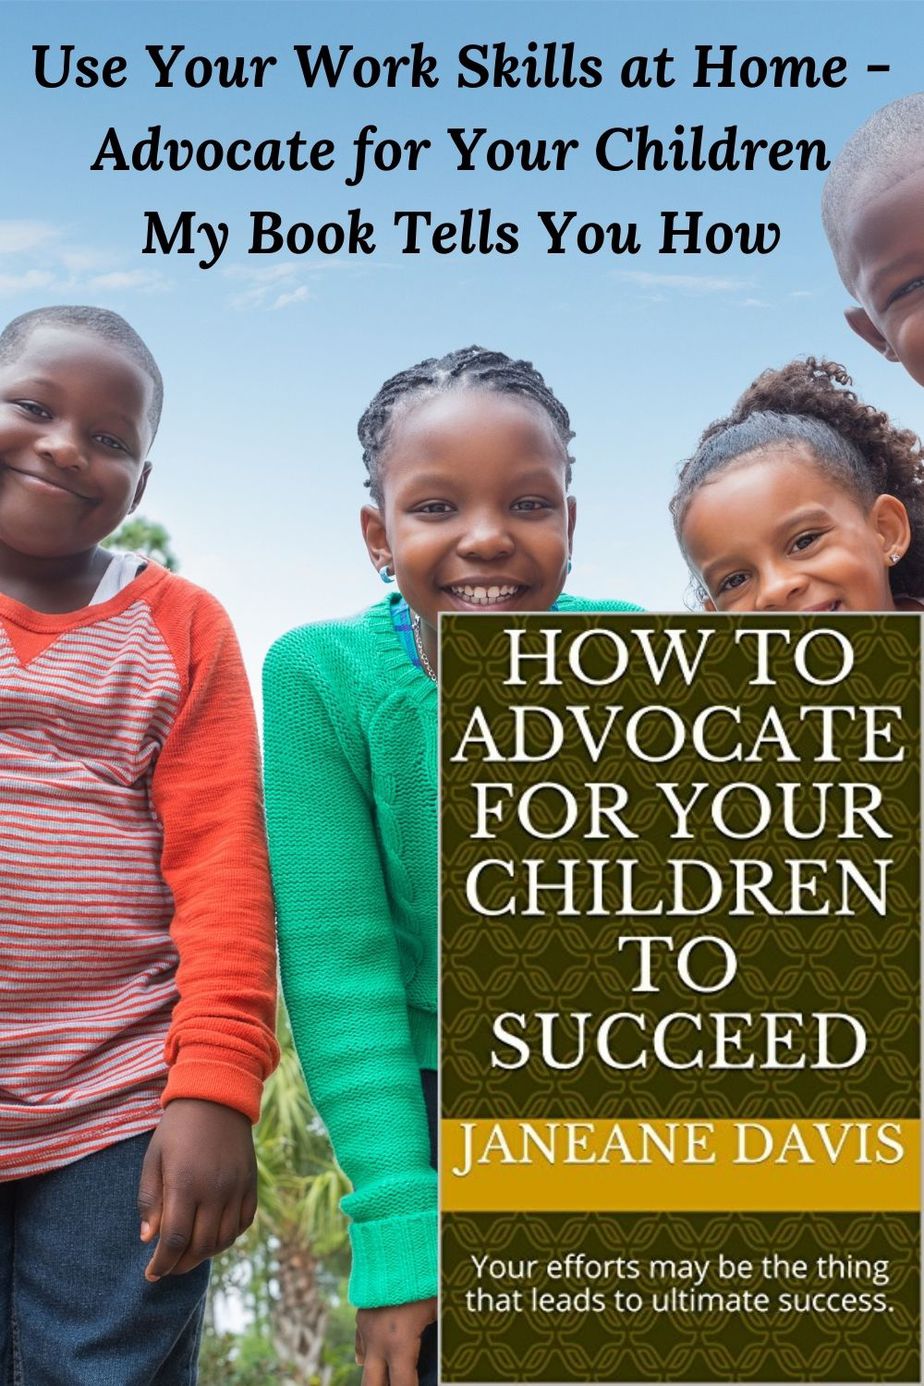 4 smiling African American children and the words Use Your Work Skills at Home - Advocate for Your Children My Book Tells You How and the cover of the book "How to Advocate for Your Children to Succeed"